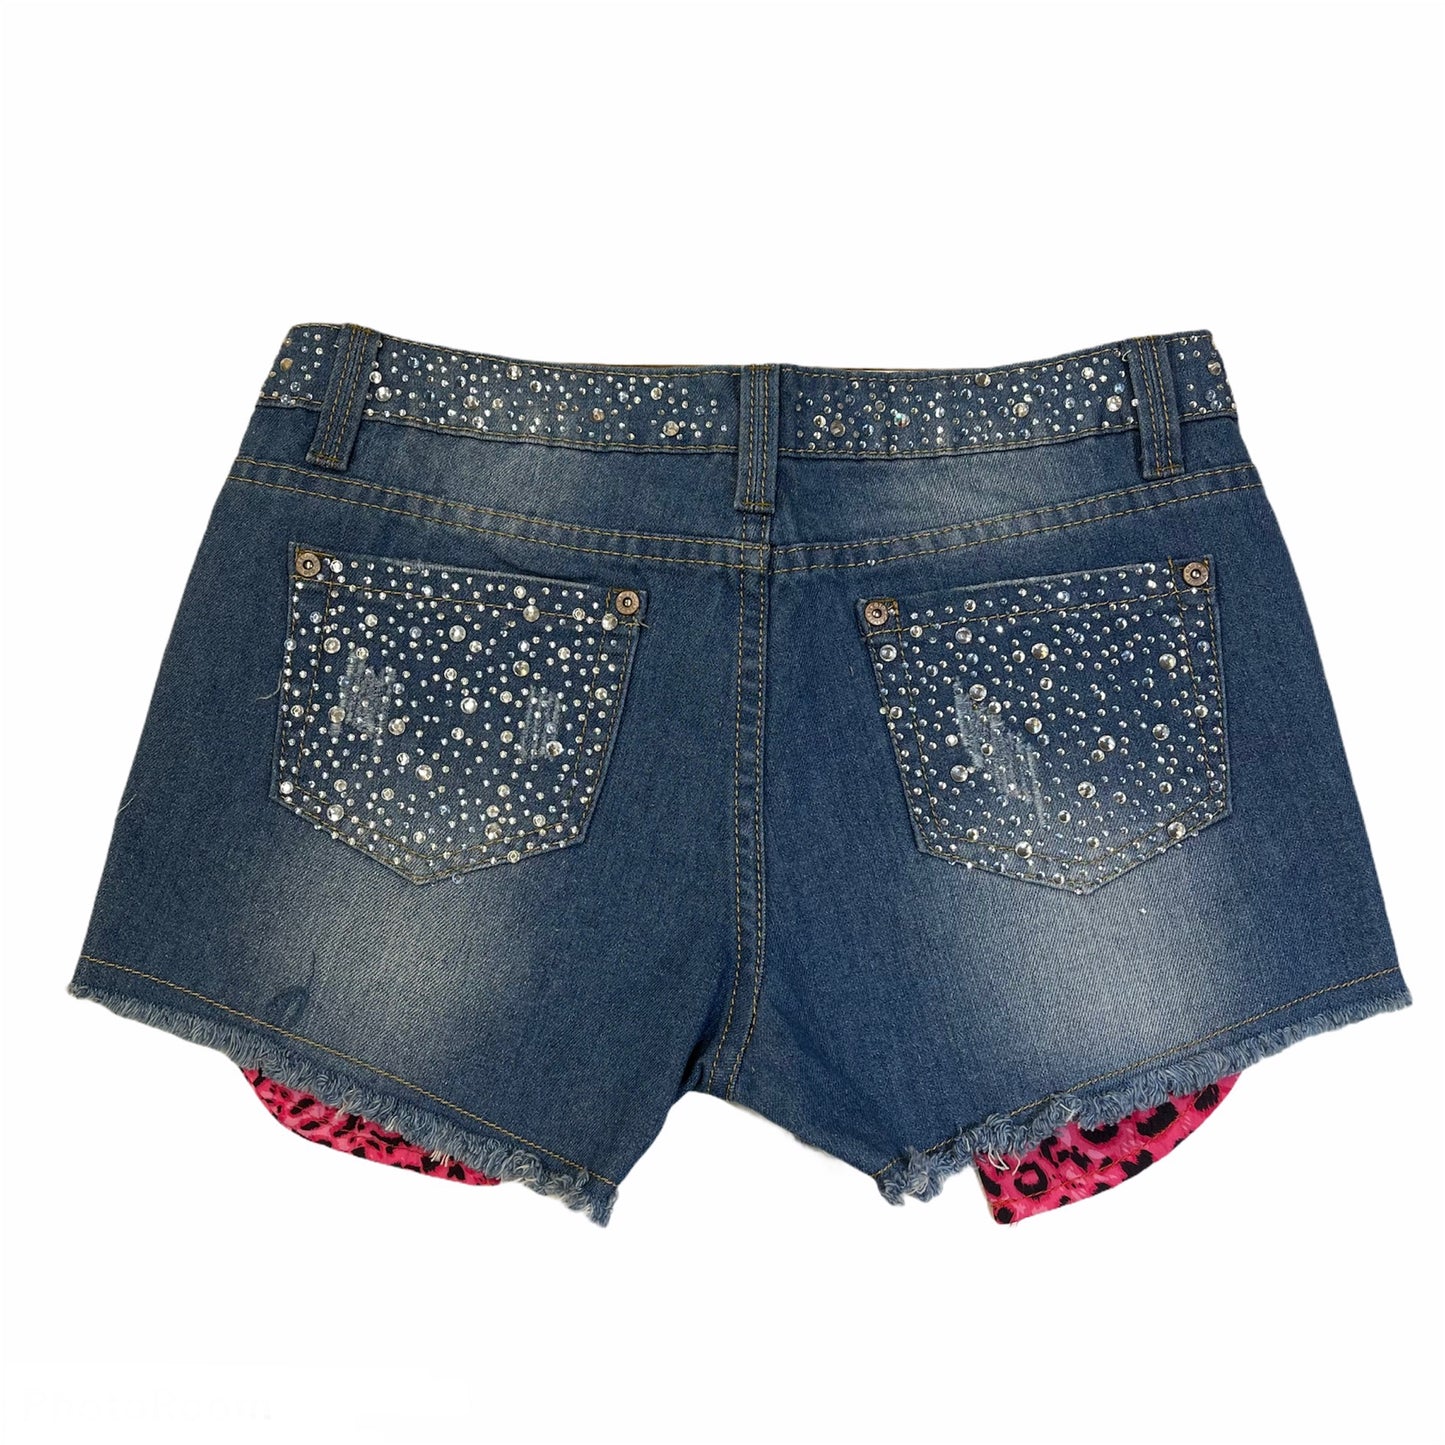 Gio Cellini Shorts strass all over